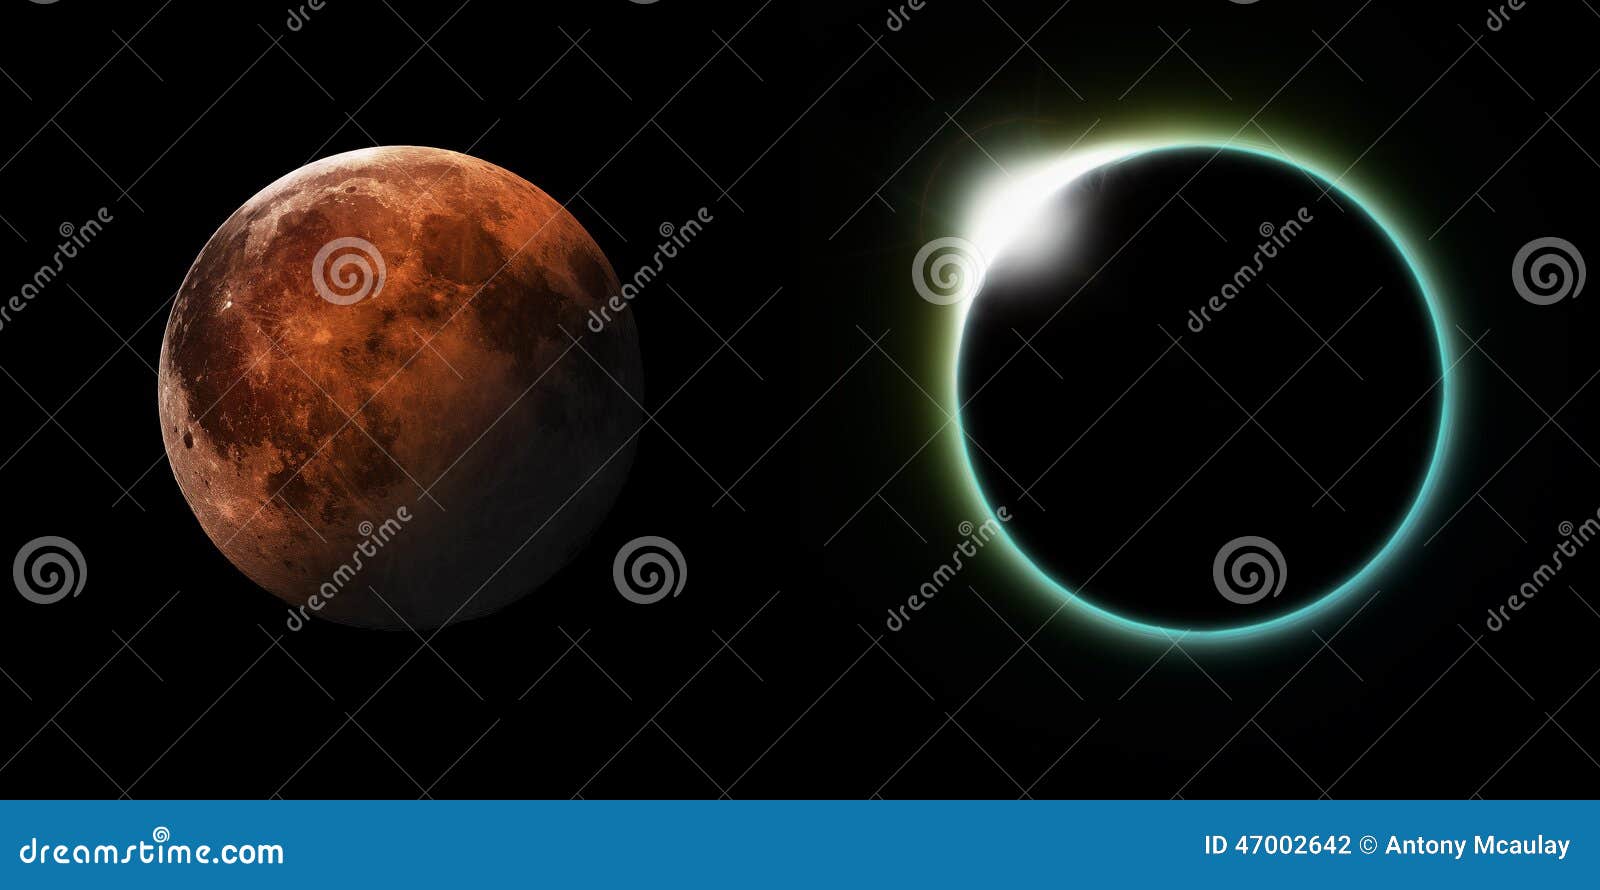 solar and lunar eclipses